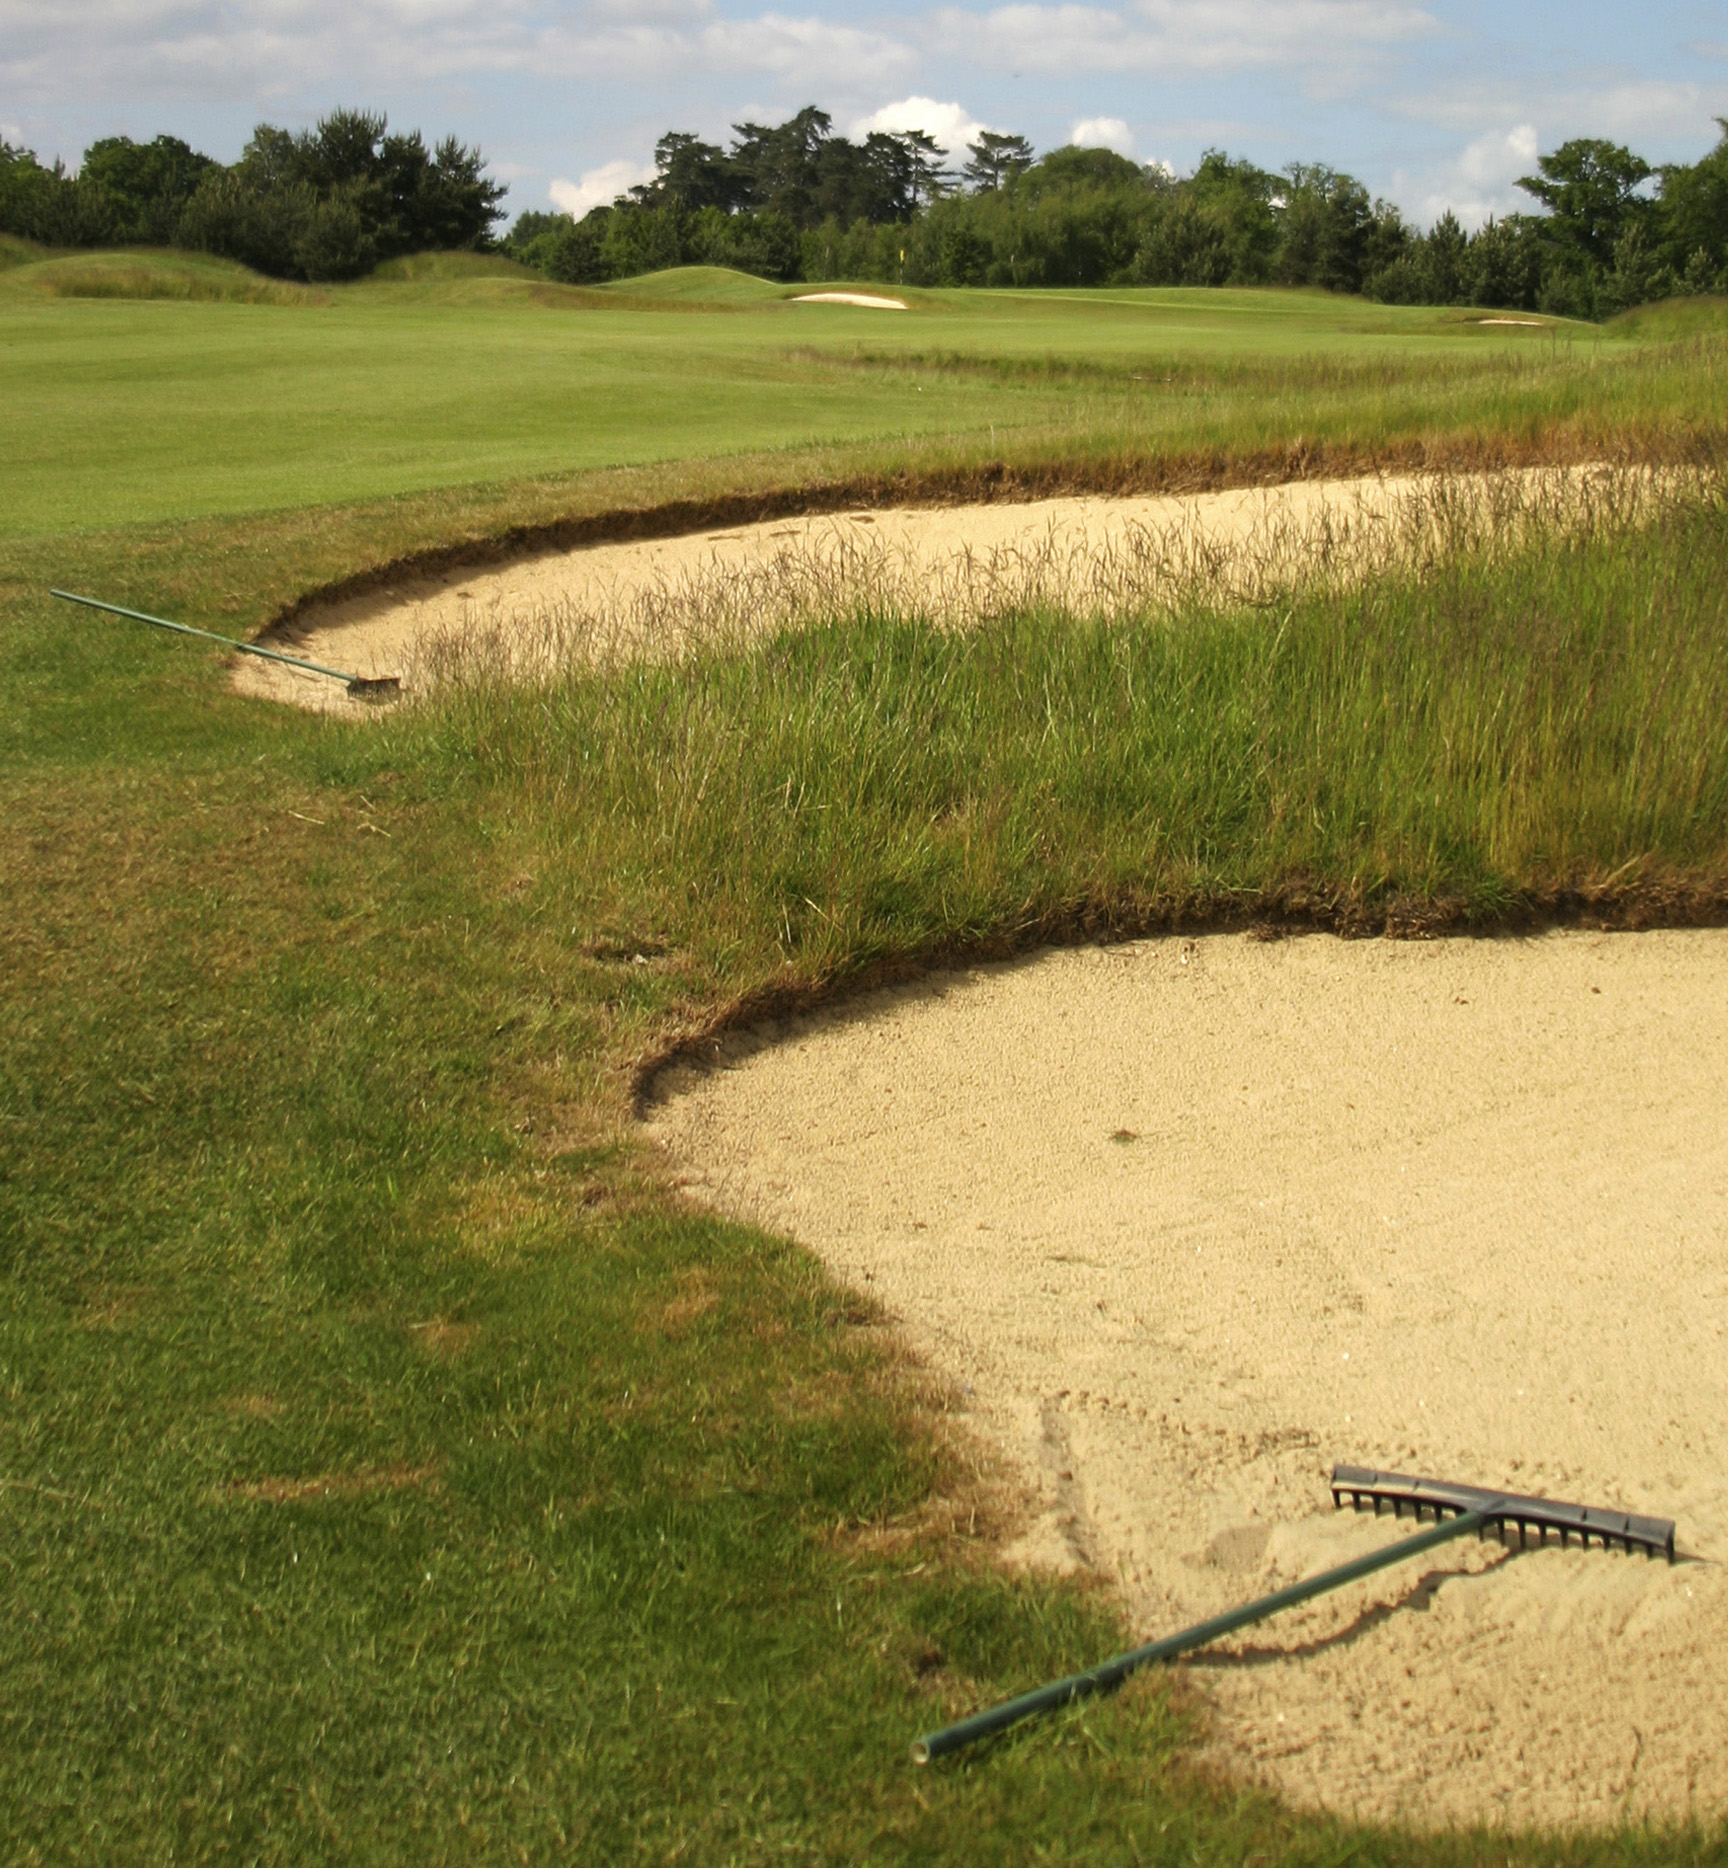 Rule 24-1: When the ball against a rake rolls into the bunker the ball must be replaced if it moves when the rake is removed 